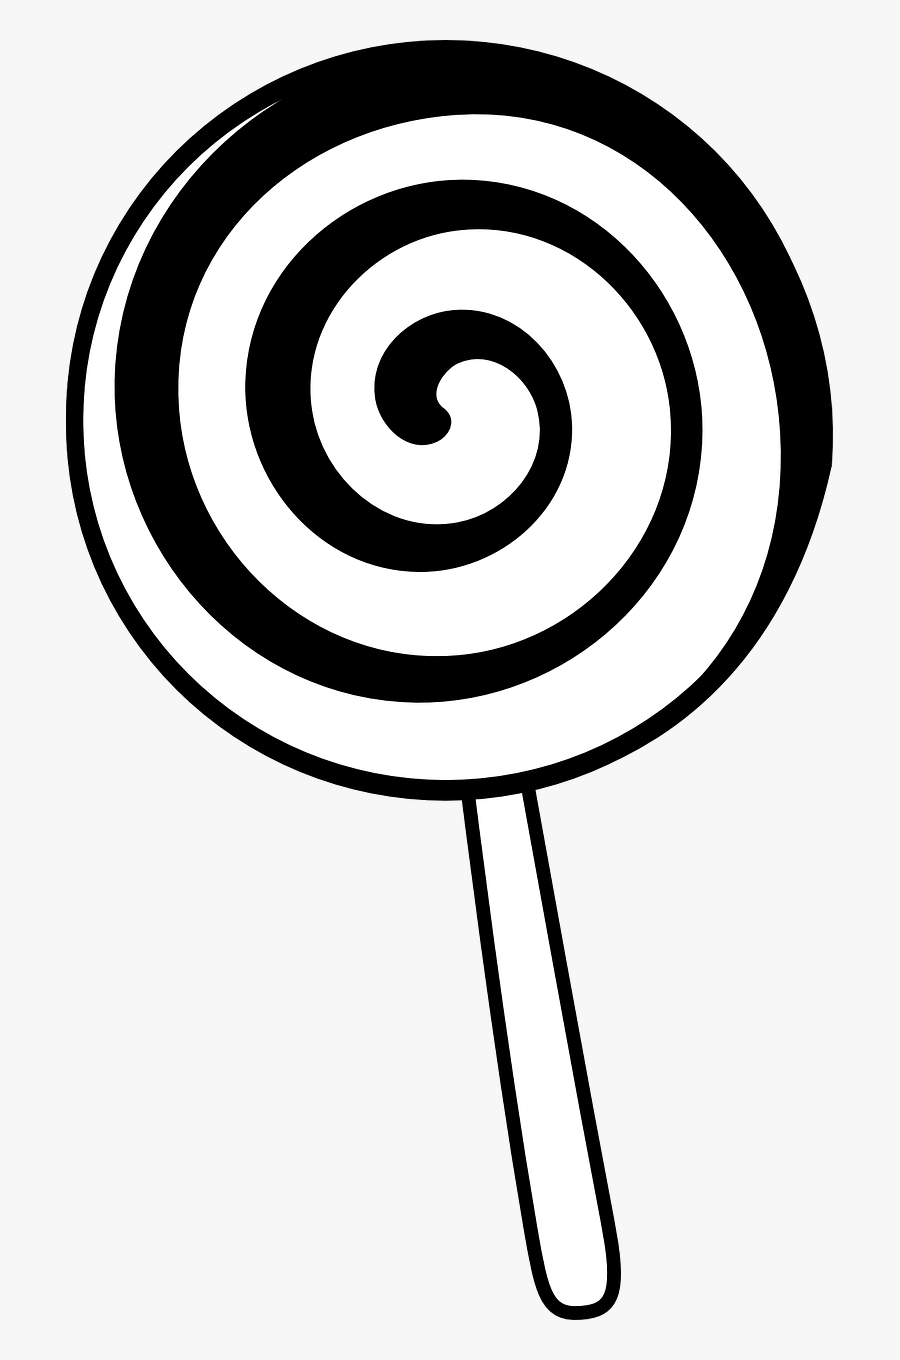 Candy Lollipop Sweets Free Picture - Lollipop Clipart Black And White, Transparent Clipart